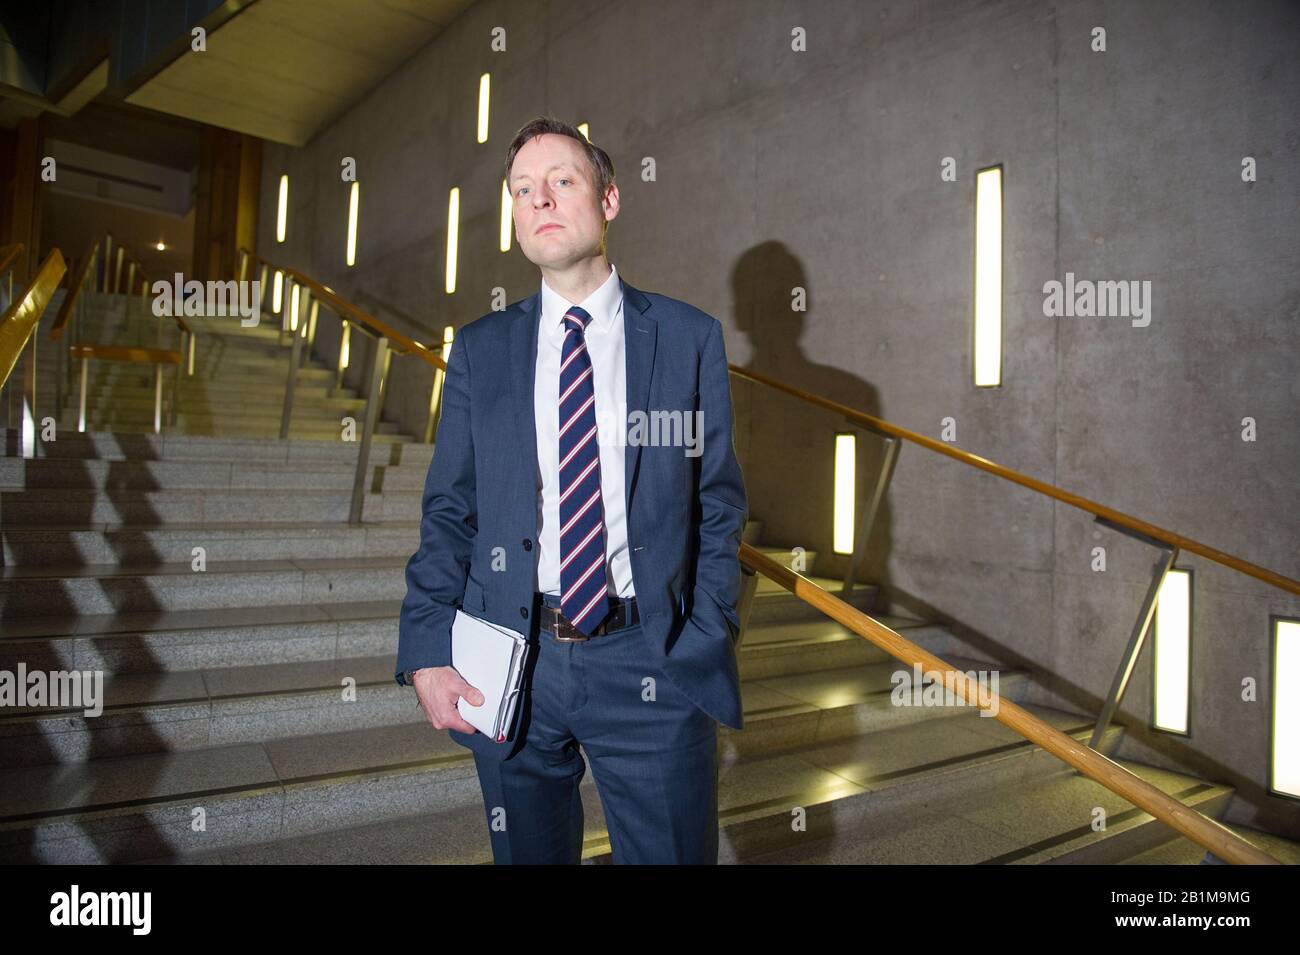 Edinburgh, UK. 26th Feb, 2020. Pictured: Liam Kerr MSP - Deputy Leader, Shadow Cabinet Secretary for Justice. Scenes from thee Scottish Parliament after decision time in the Chamber. Credit: Colin Fisher/Alamy Live News Stock Photo